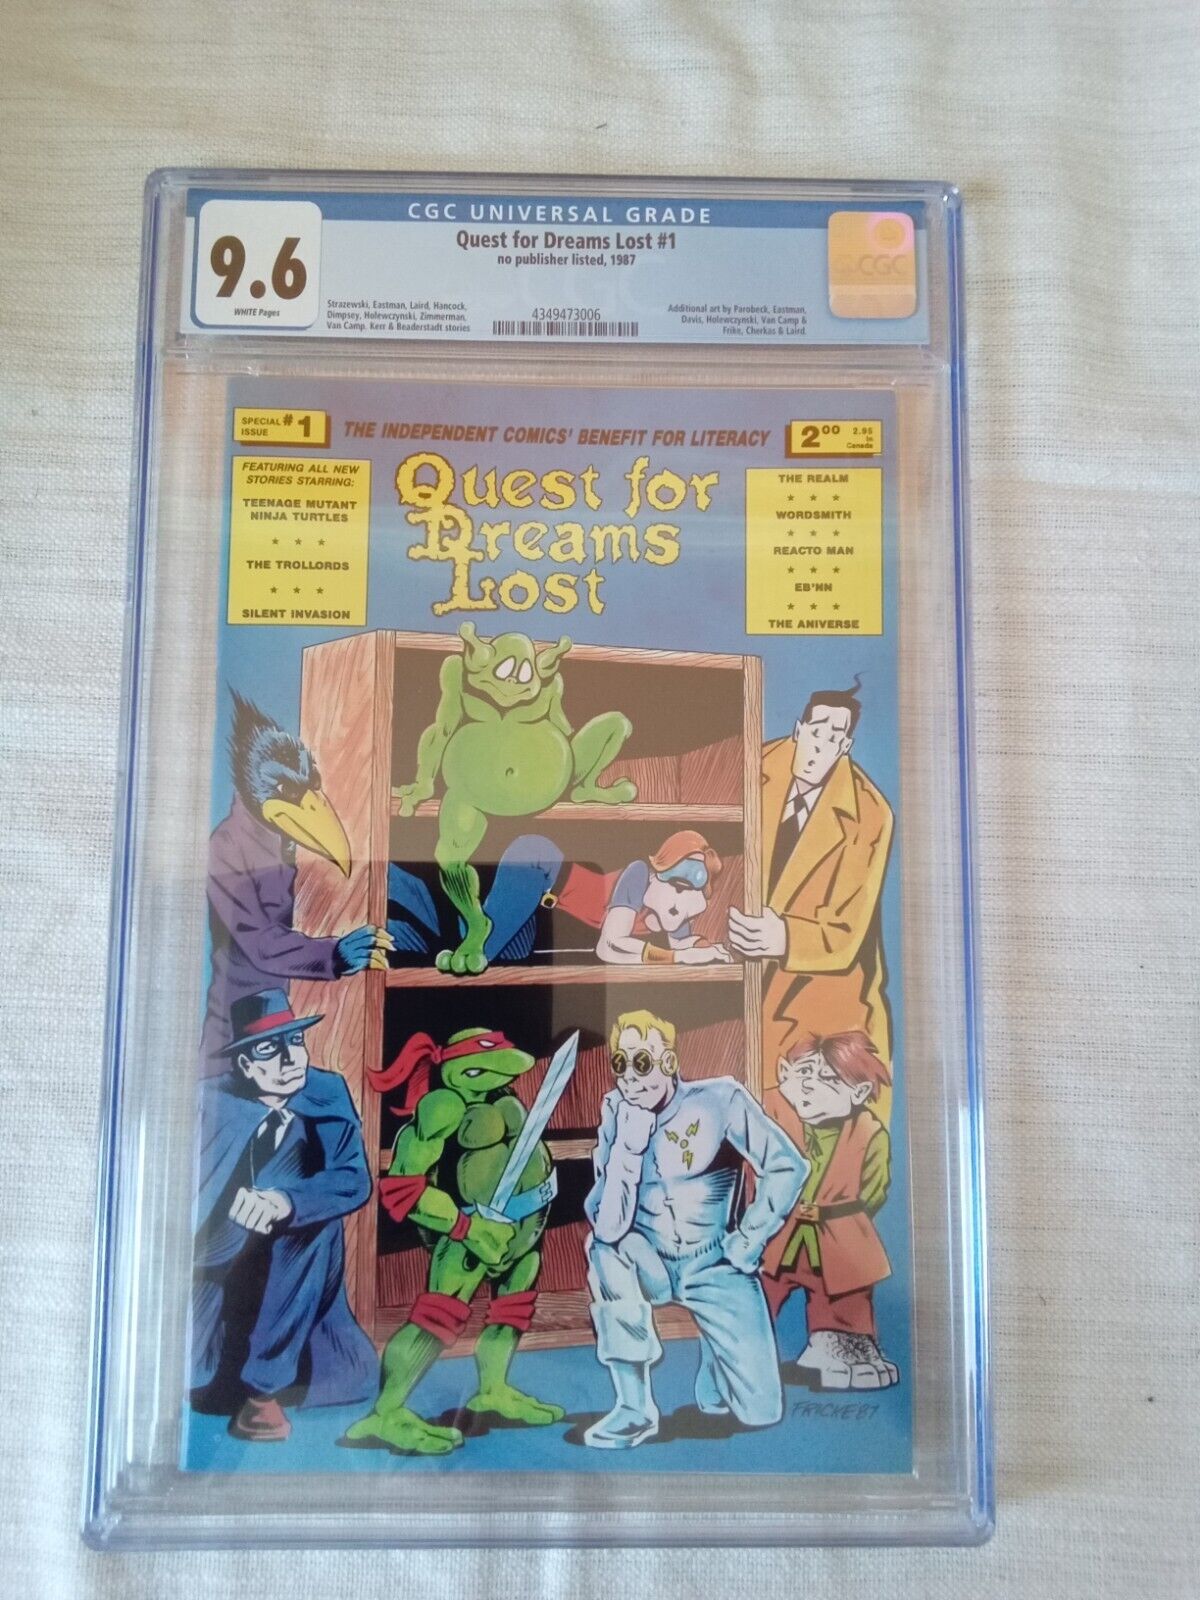 Quest for Dreams Lost #1 Tmnt story 1987 9.6 cgc only 1 book with a higher grade